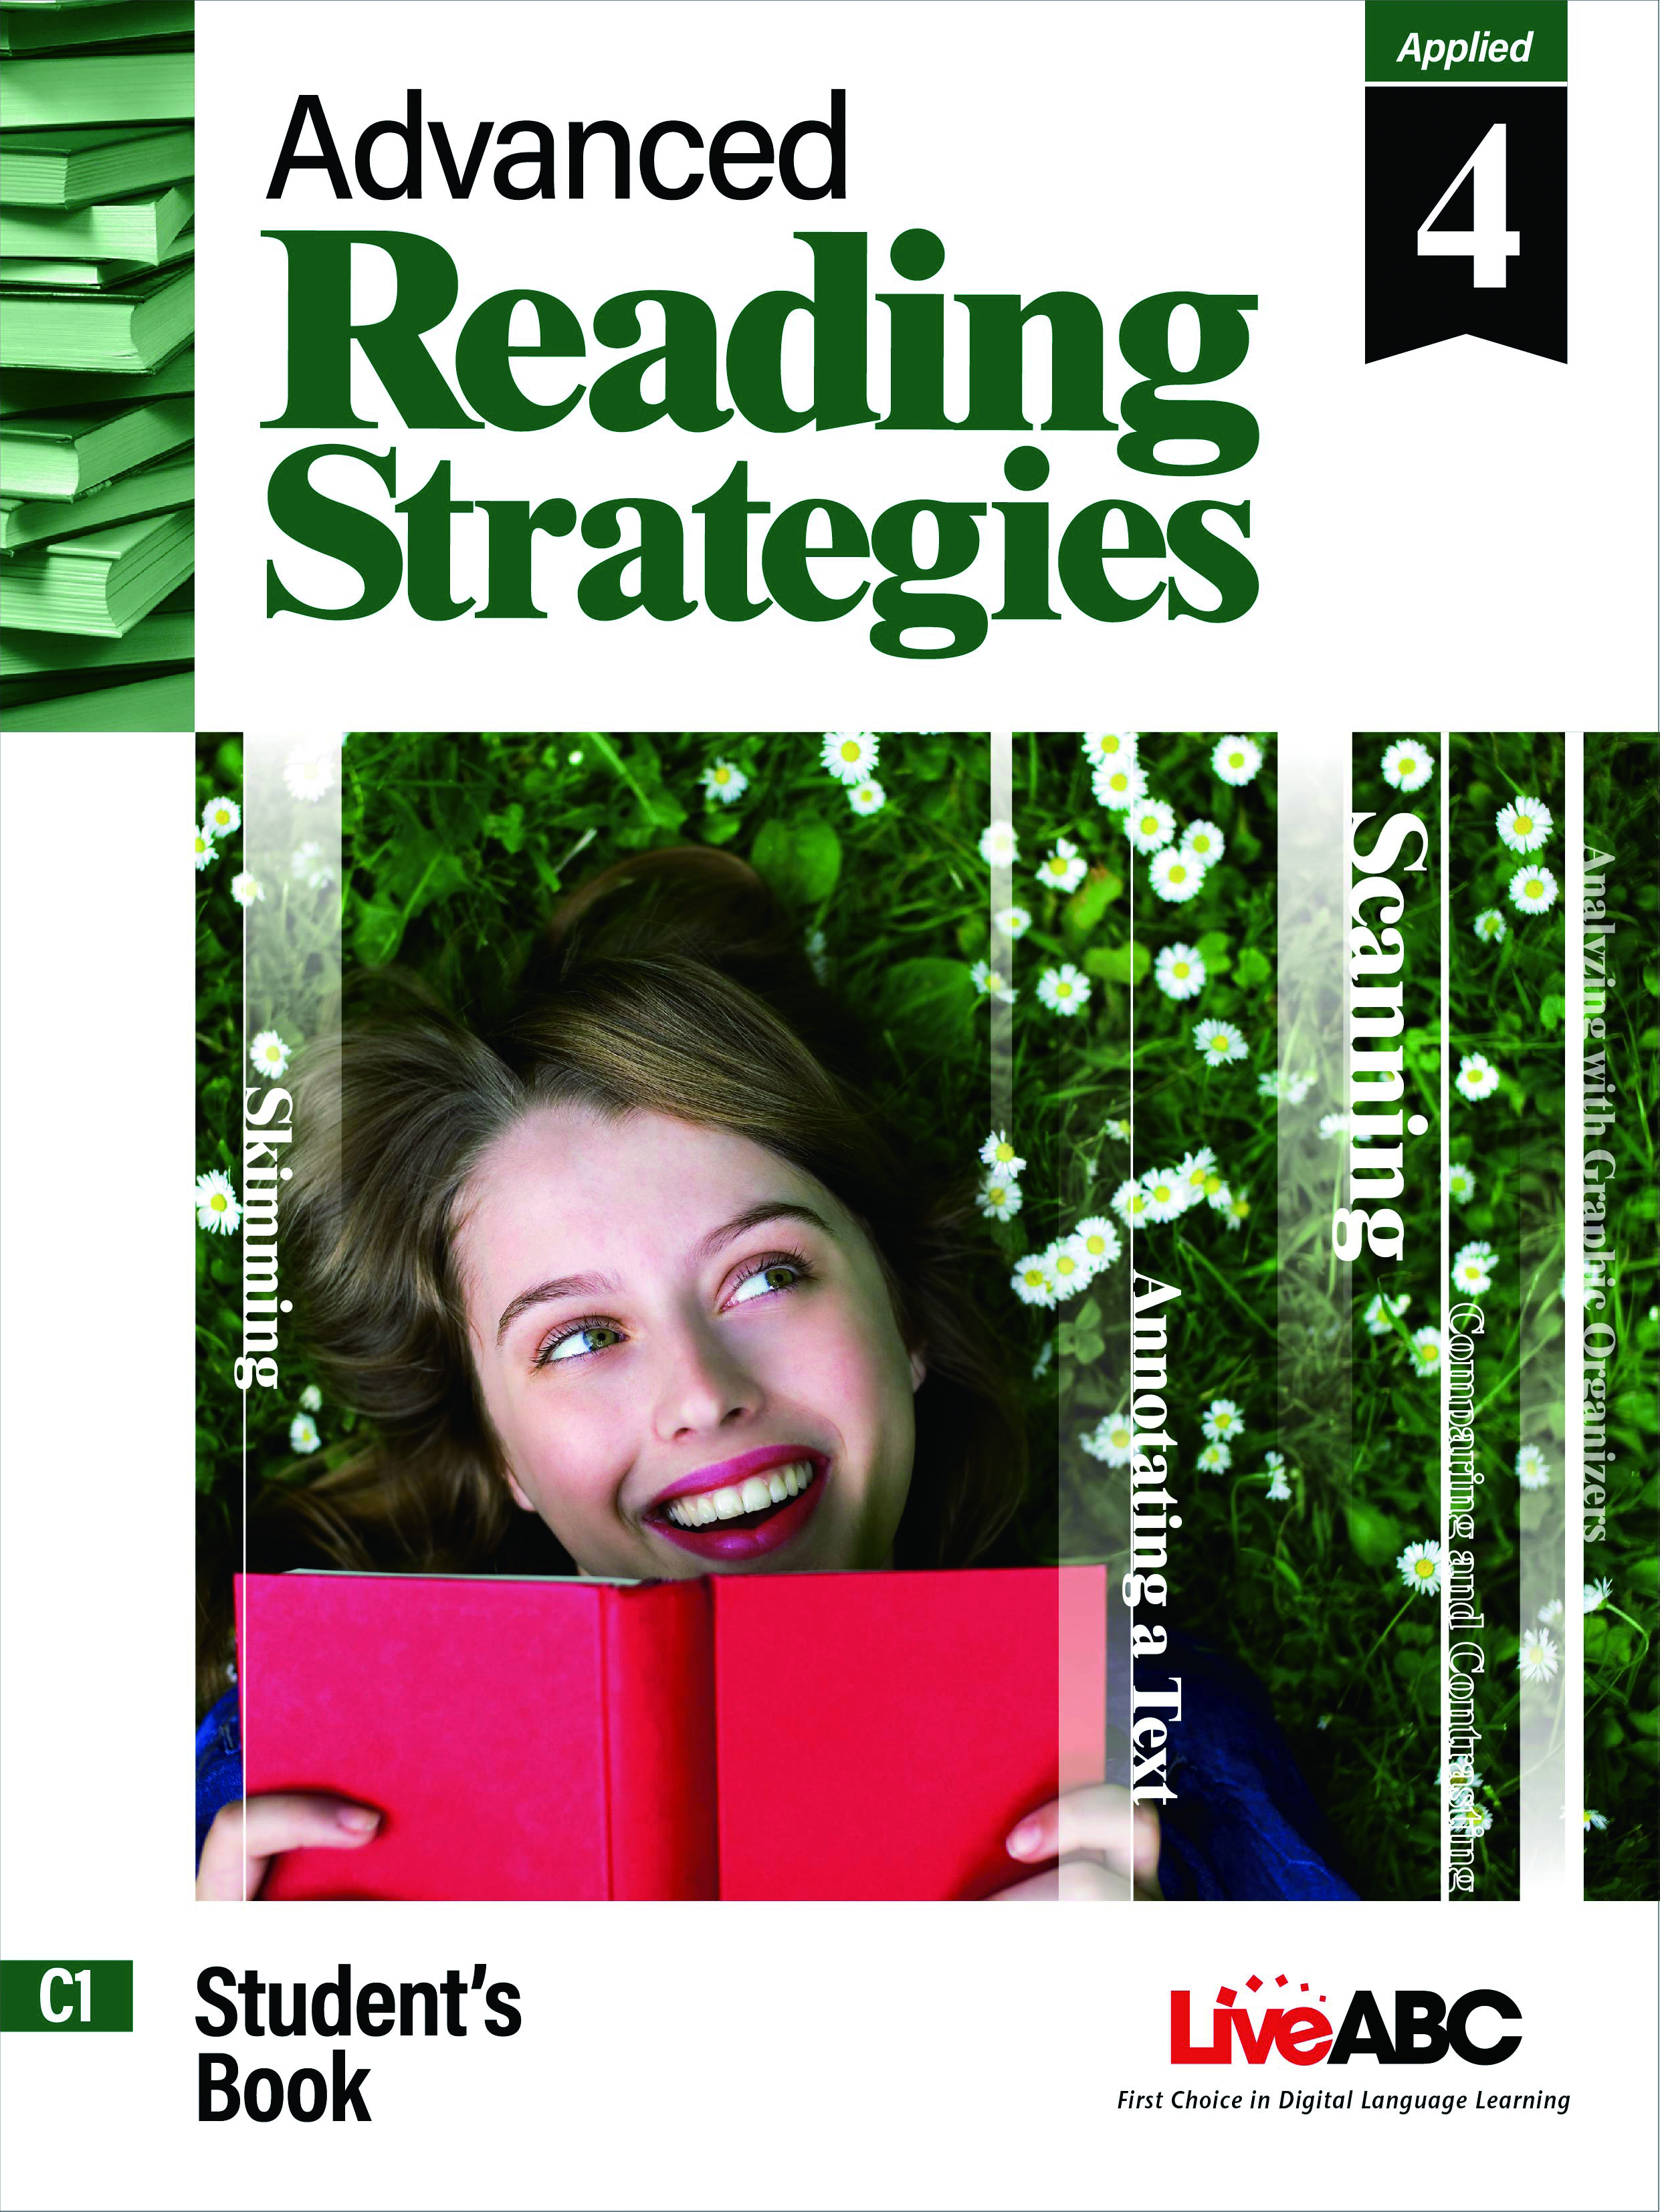 Advanced Reading Strategy SB cover B4 Coming soon